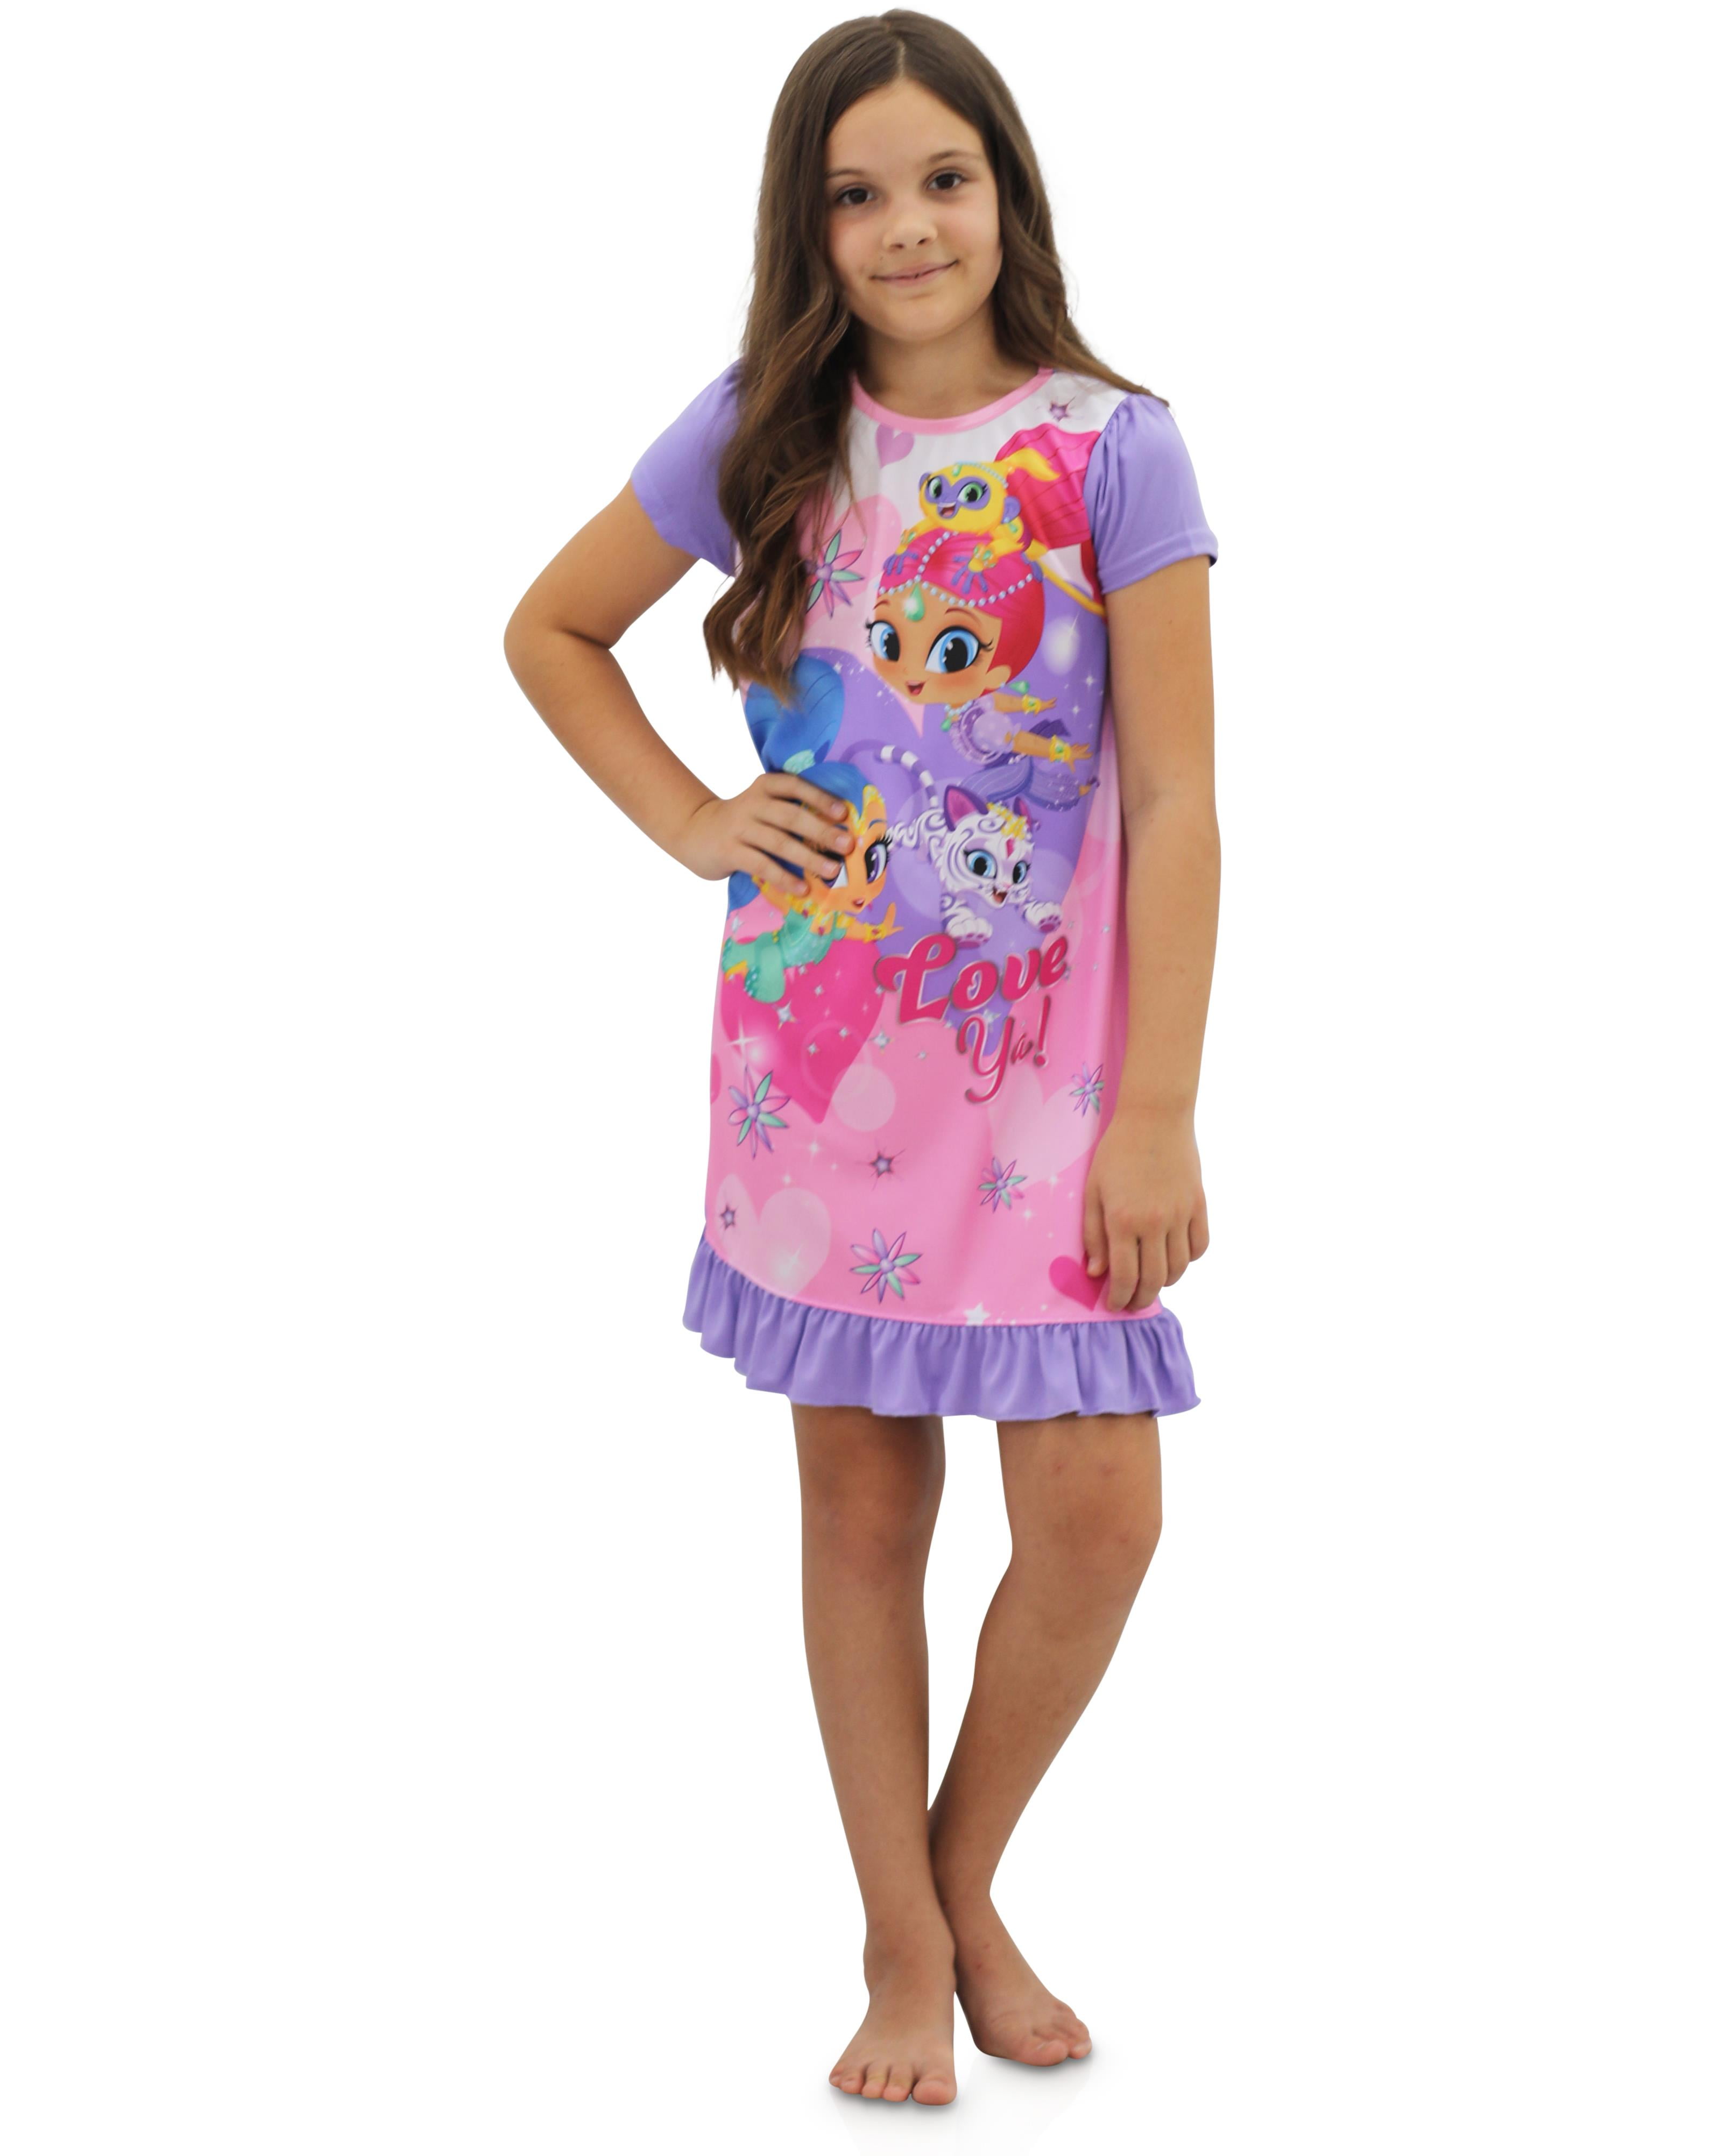 Girls Shimmer & Shine Nightdress Ages 2,3,4,5,6,7,8 Years NEW